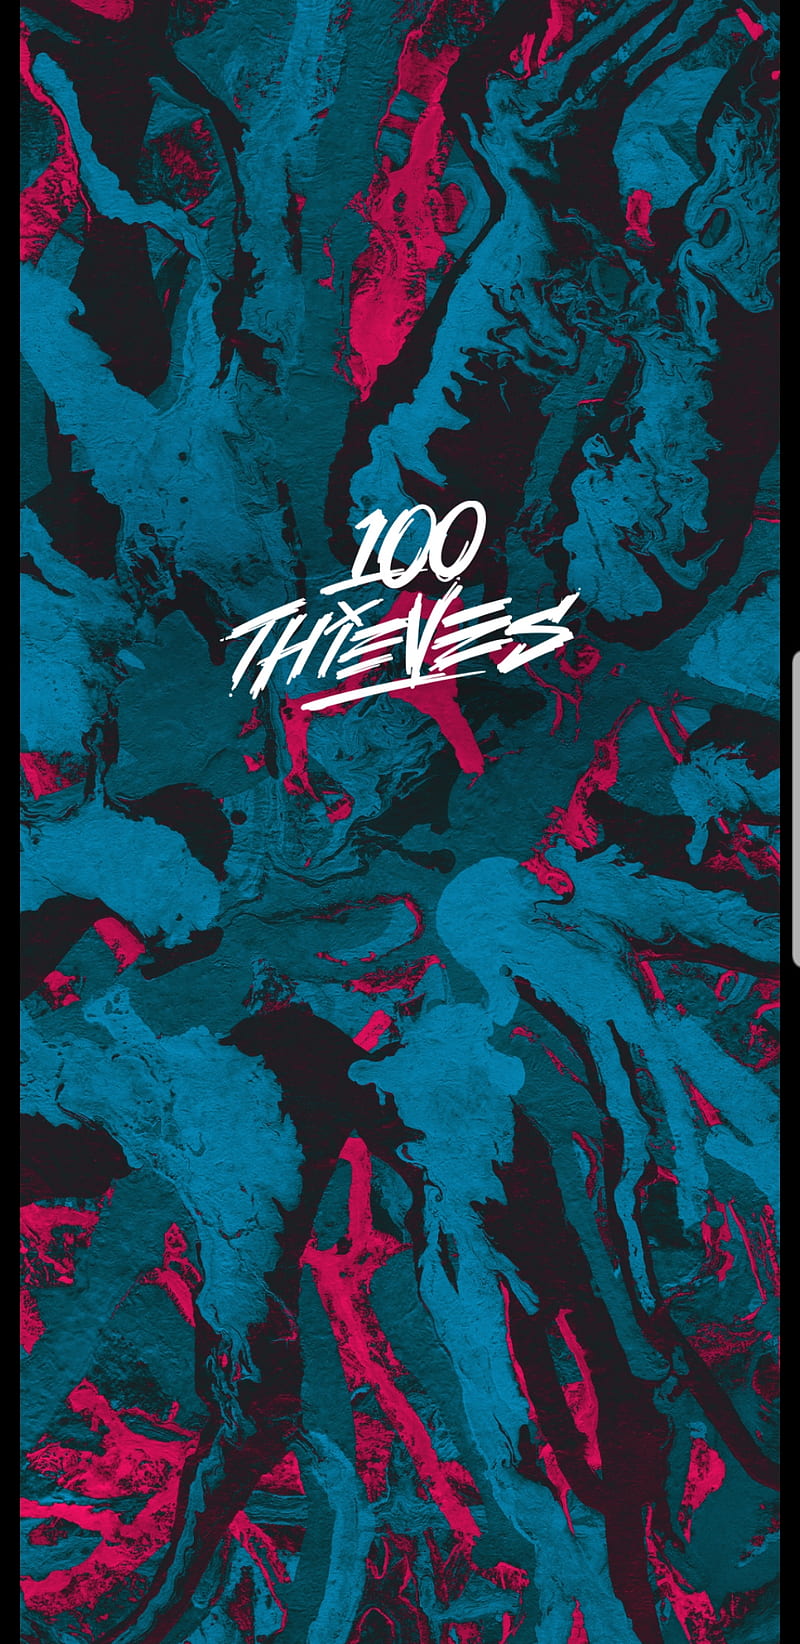 100 Thieves Wallpapers on Behance